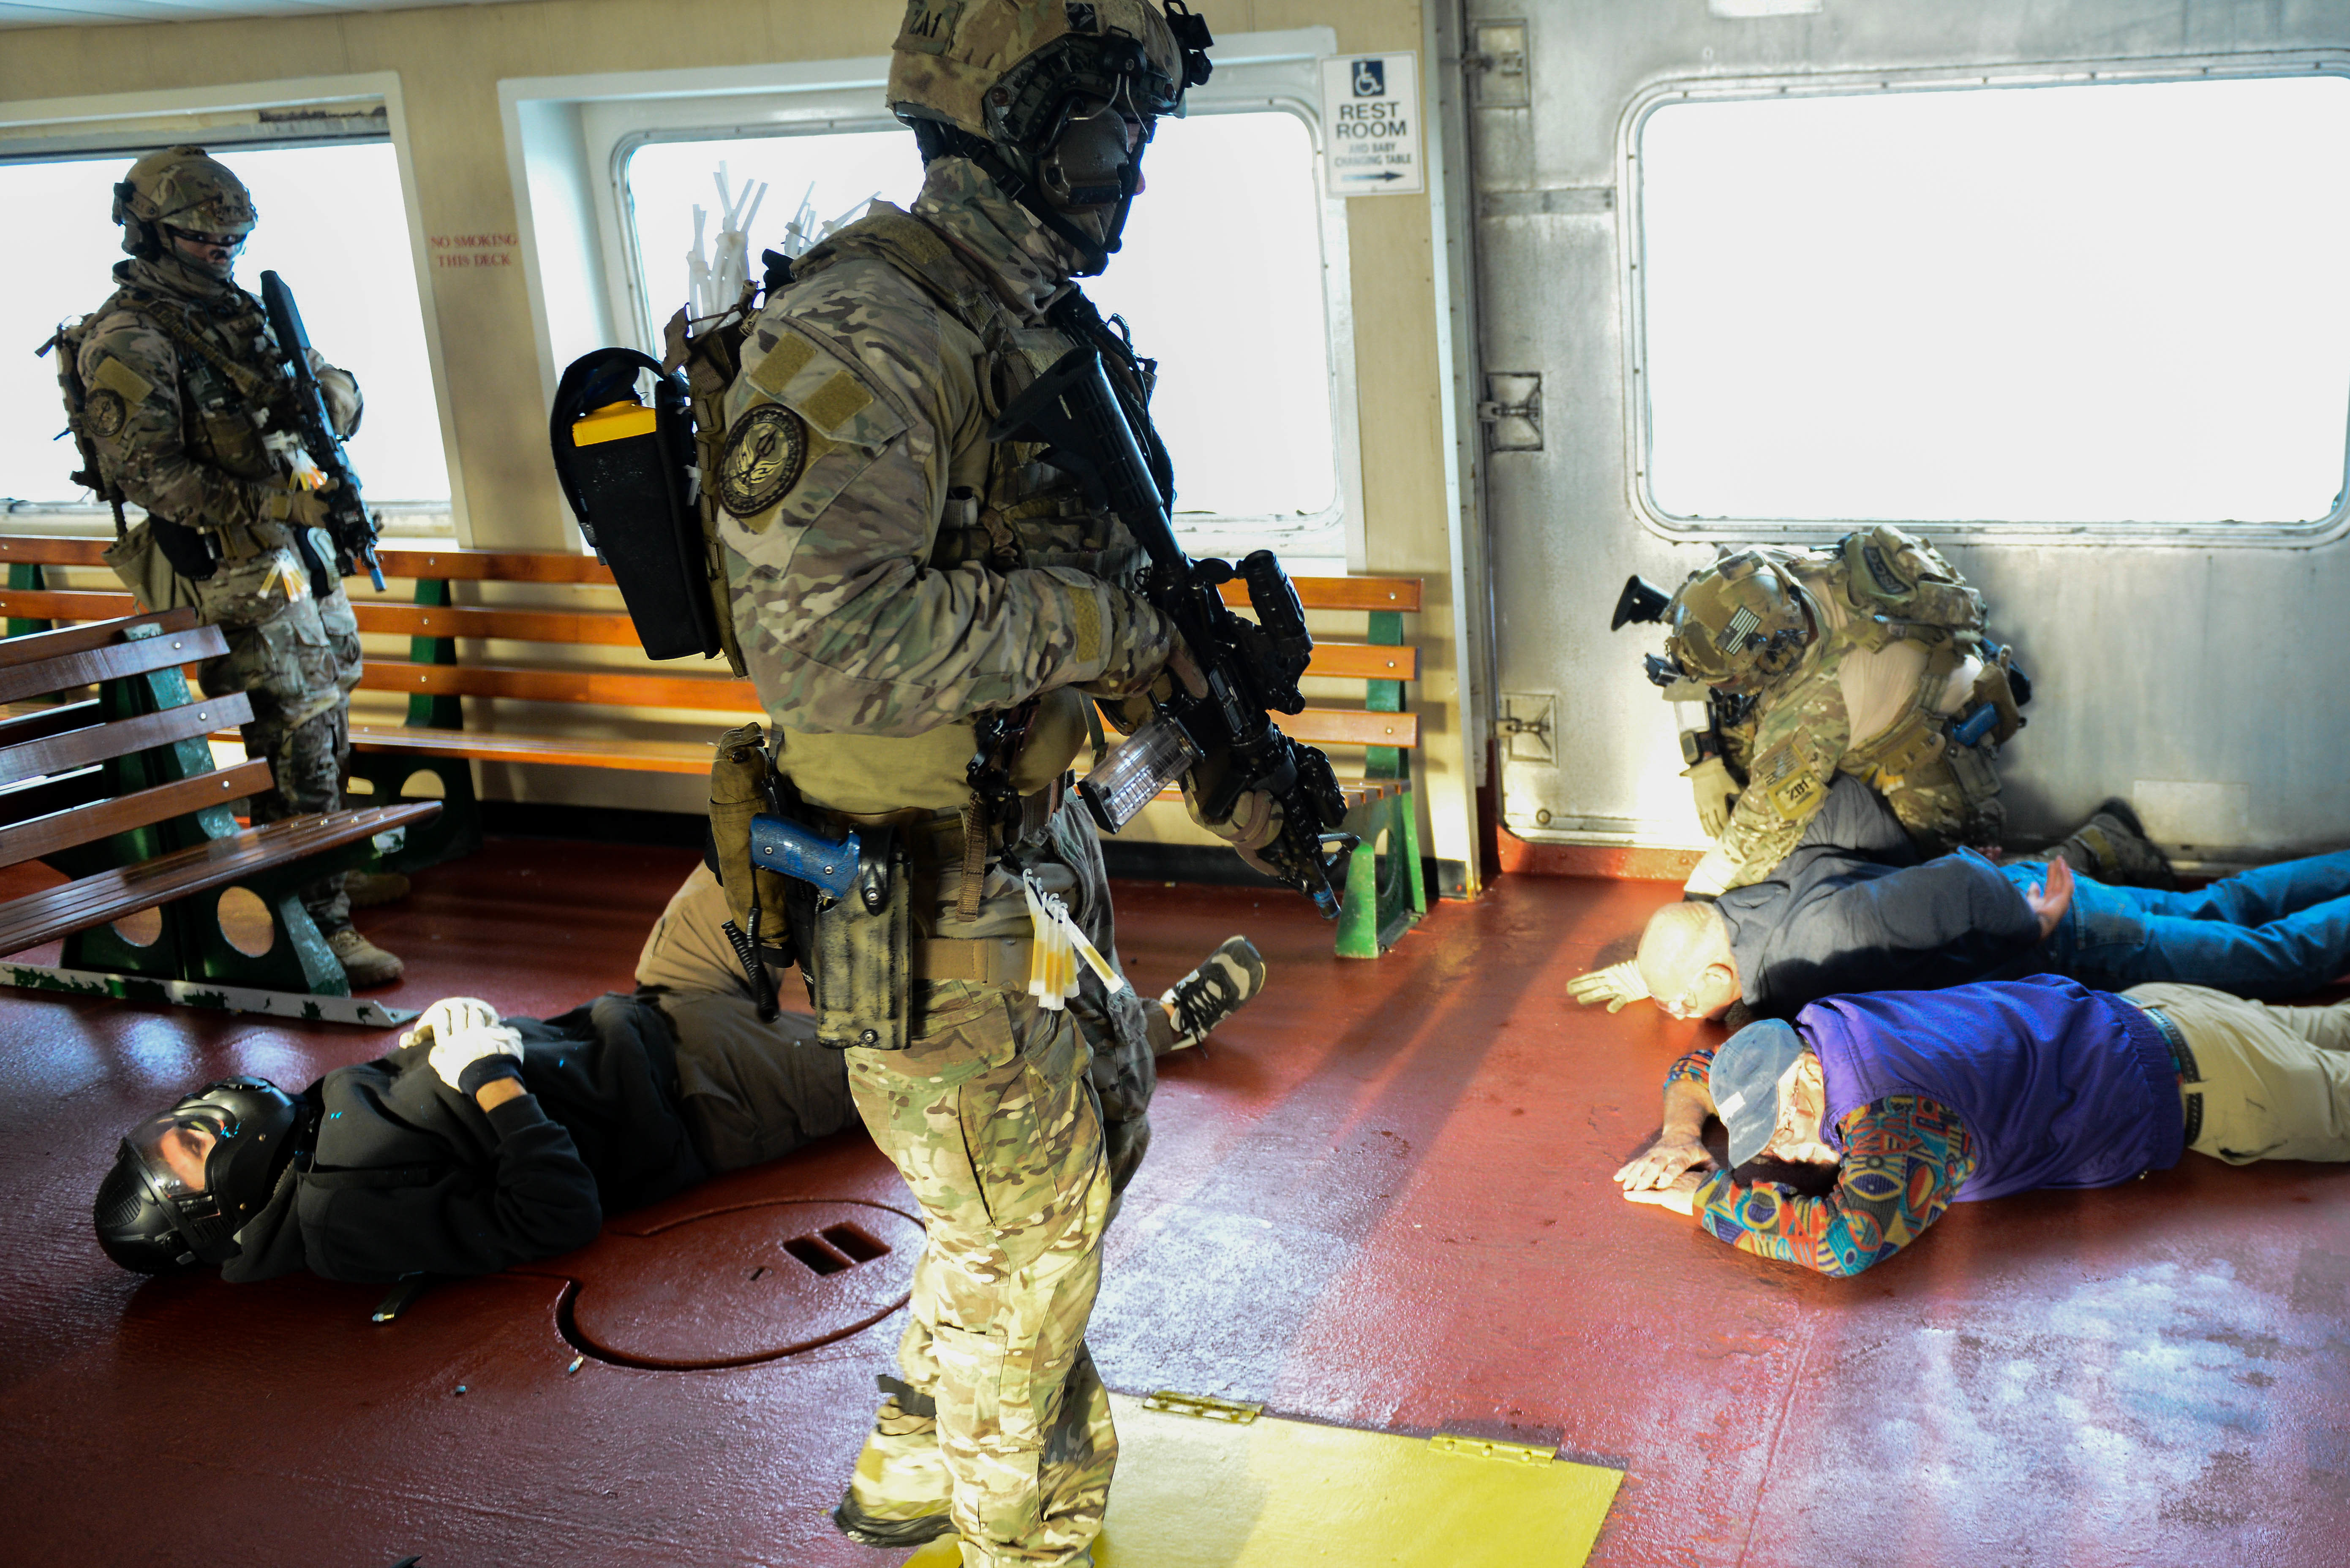 The Coast Guard’s Maritime Security Response Team (MSRT) from Virginia participates in a training evolution in Hyannis, Mass., Thursday, Oct., 22, 2015. The highly trained and specialized team, using a real-world underway ferry, practiced tactical boardings-at-sea, active shooter scenarios, and detection of radiological material. (U.S. Coast Guard photo by Petty Officer 3rd Class Ross Ruddell)